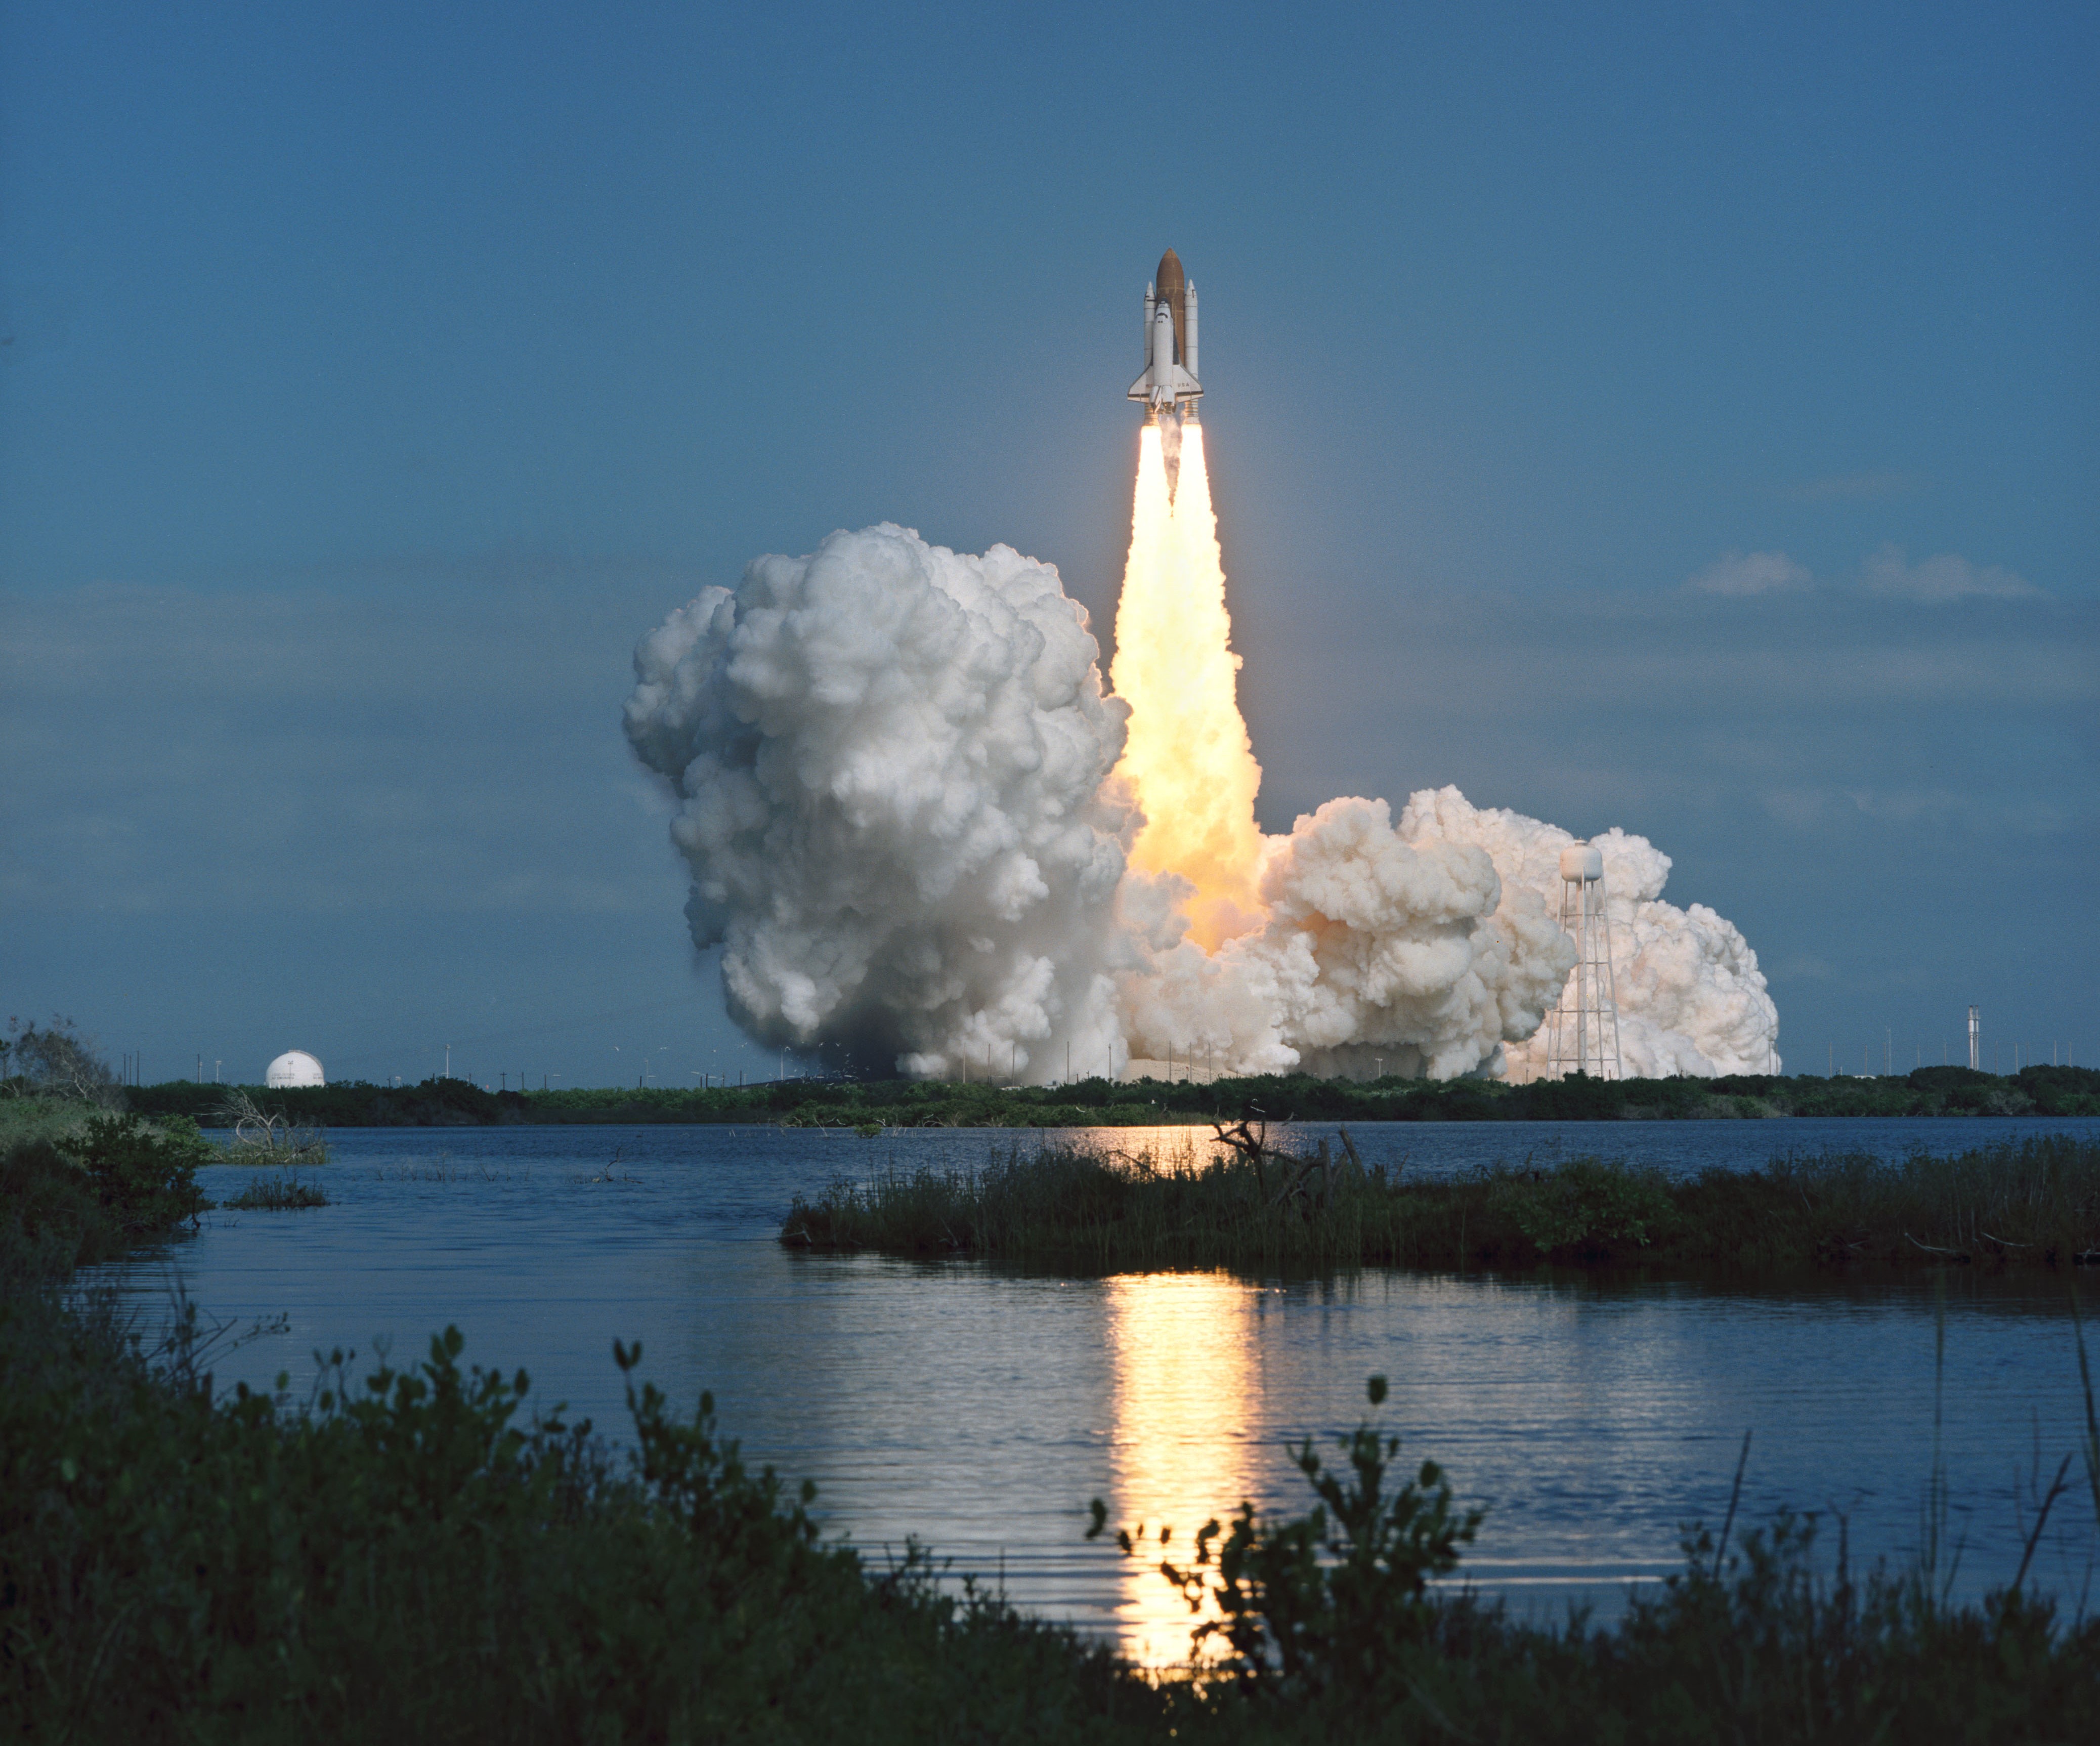 Liftoff of space shuttle Columbia on the STS-58 Spacelab Life Sciences 2 mission